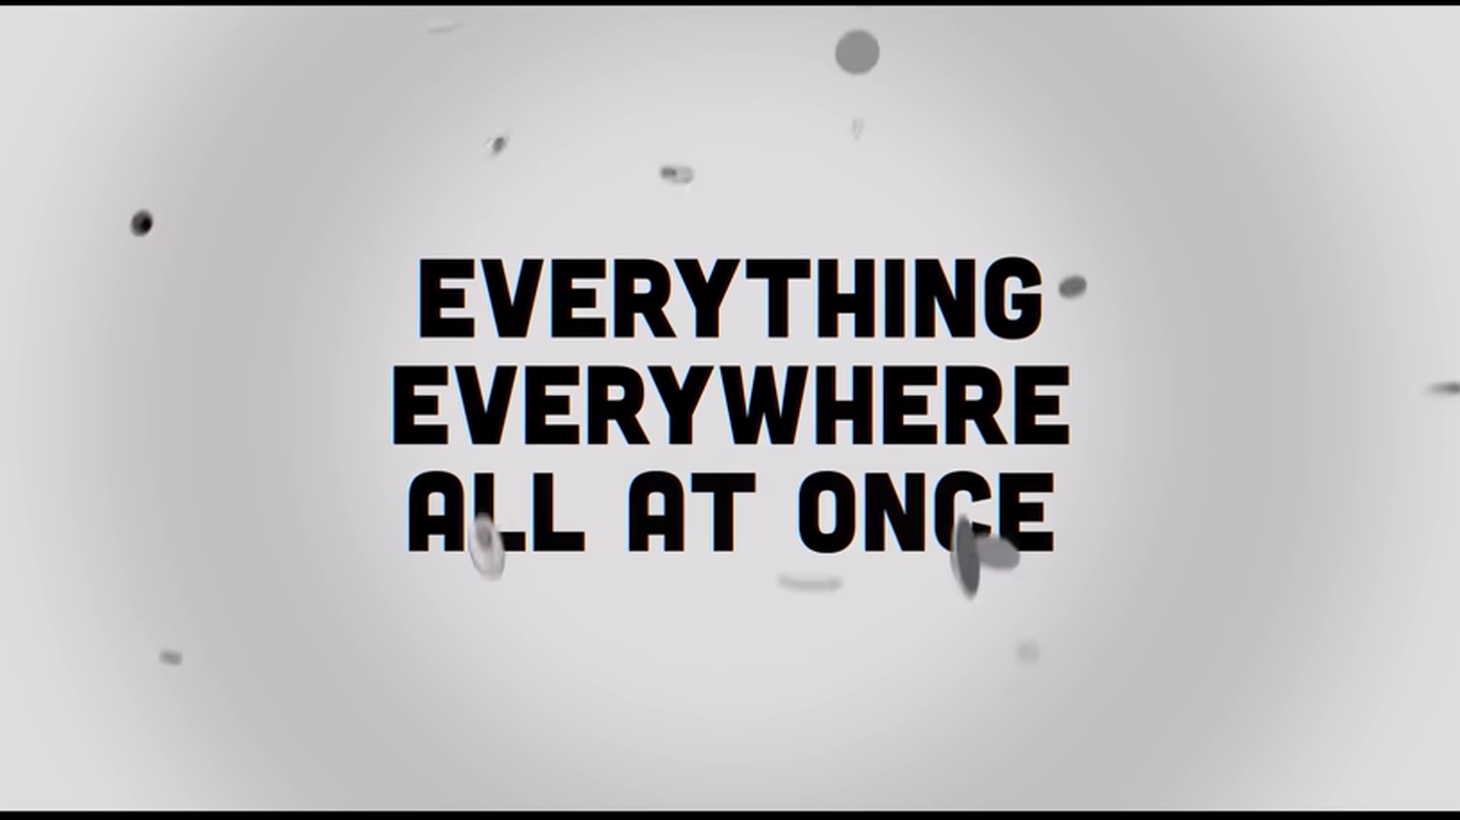 “Everything Everywhere All At Once” is nominated for 11 Oscars, including Best Picture.